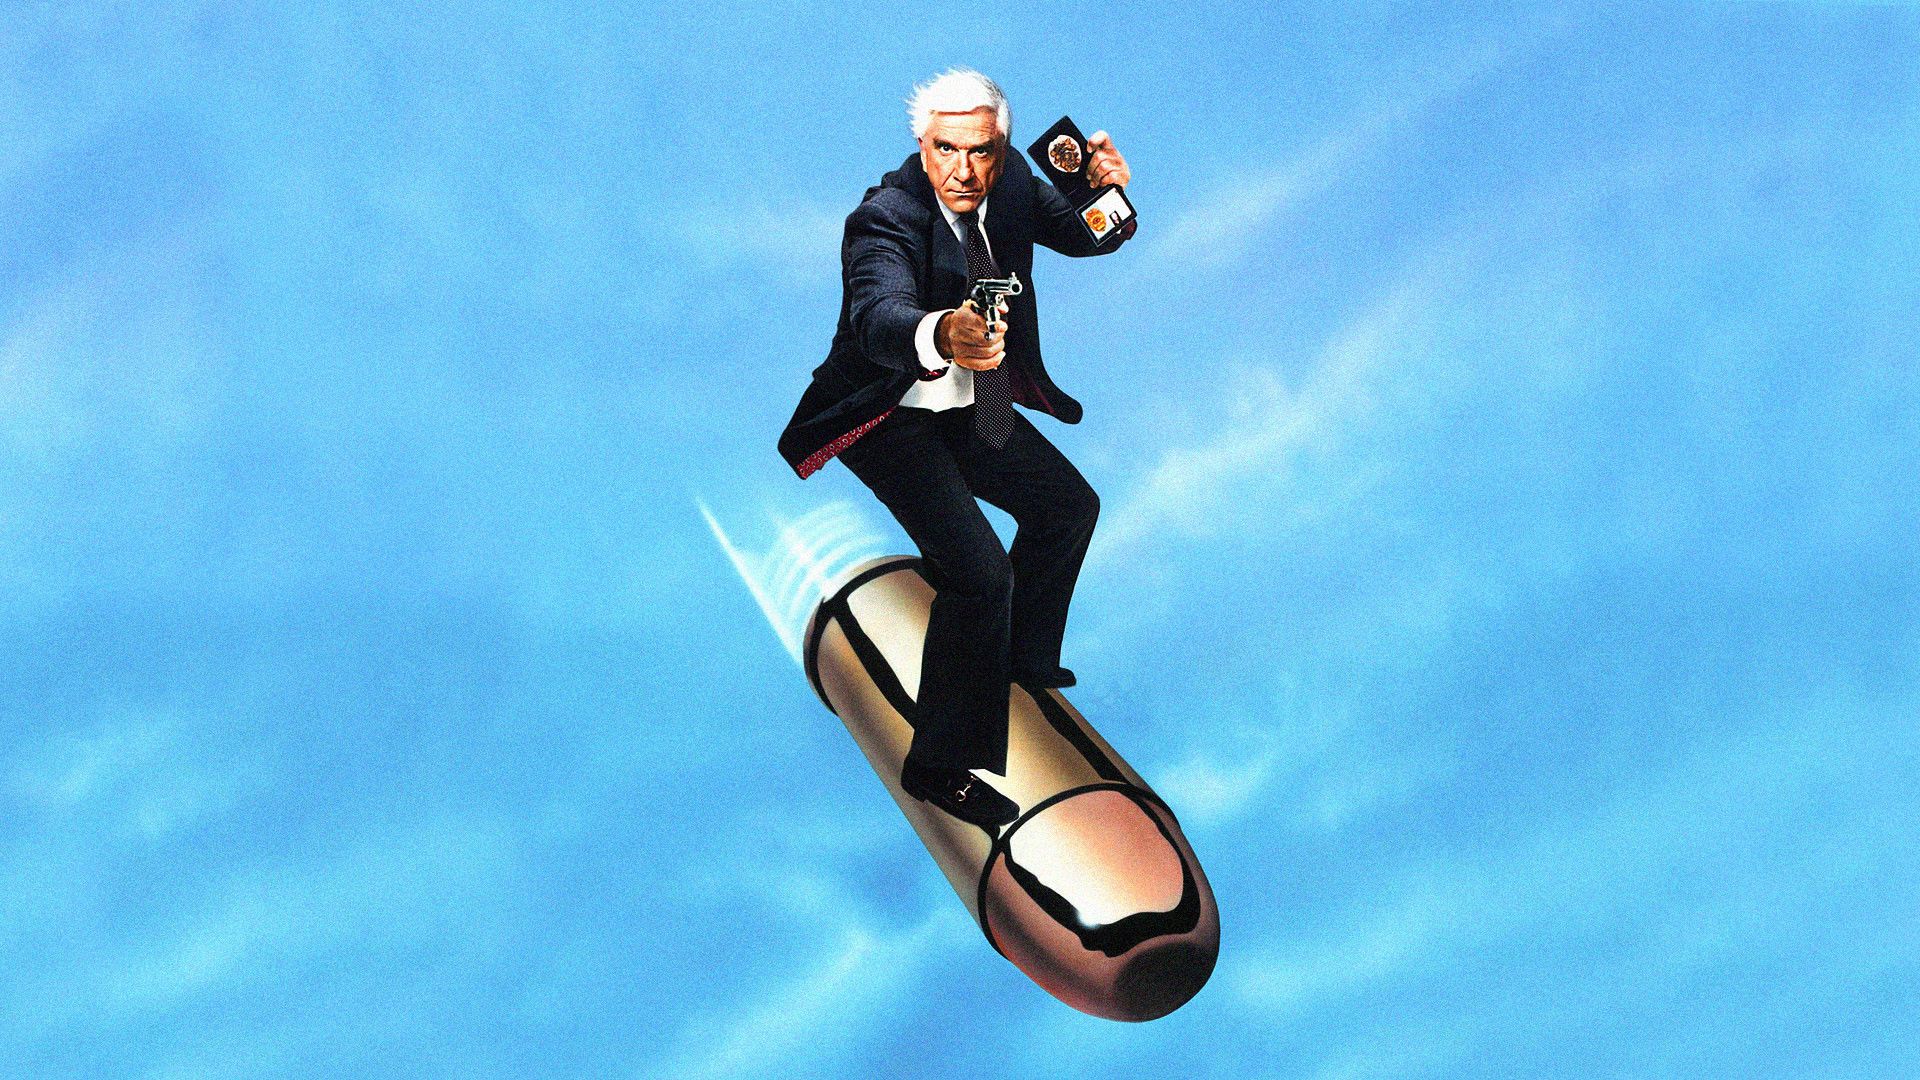 The Naked Gun: From the Files of Police Squad! background